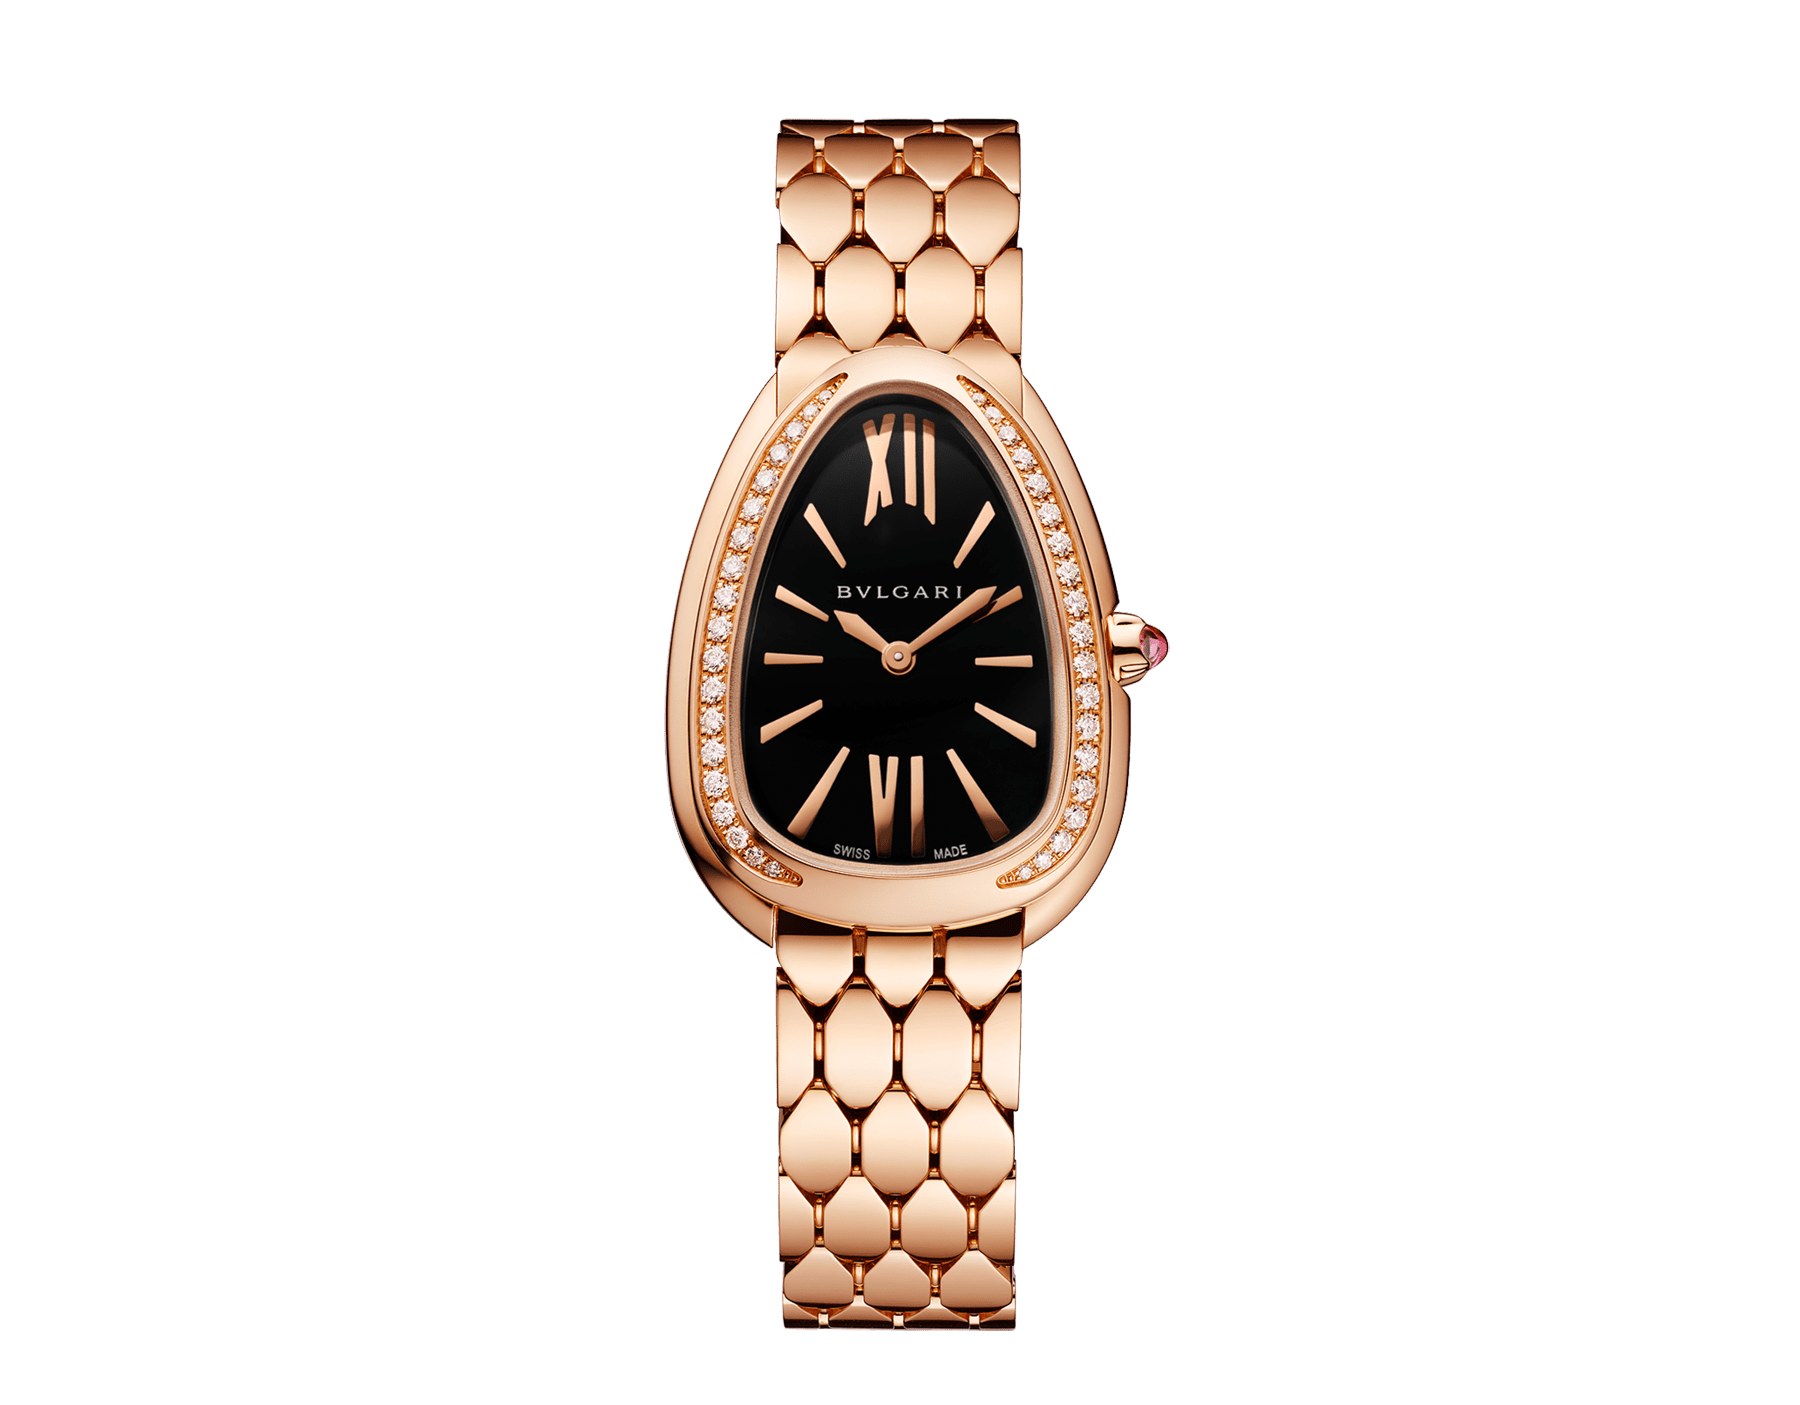 Serpenti Seduttori watch with 18 kt rose gold case set with diamonds, black lacquered dial and 18 kt rose gold bracelet. Water-resistant up to 30 meters. 103453 image 1